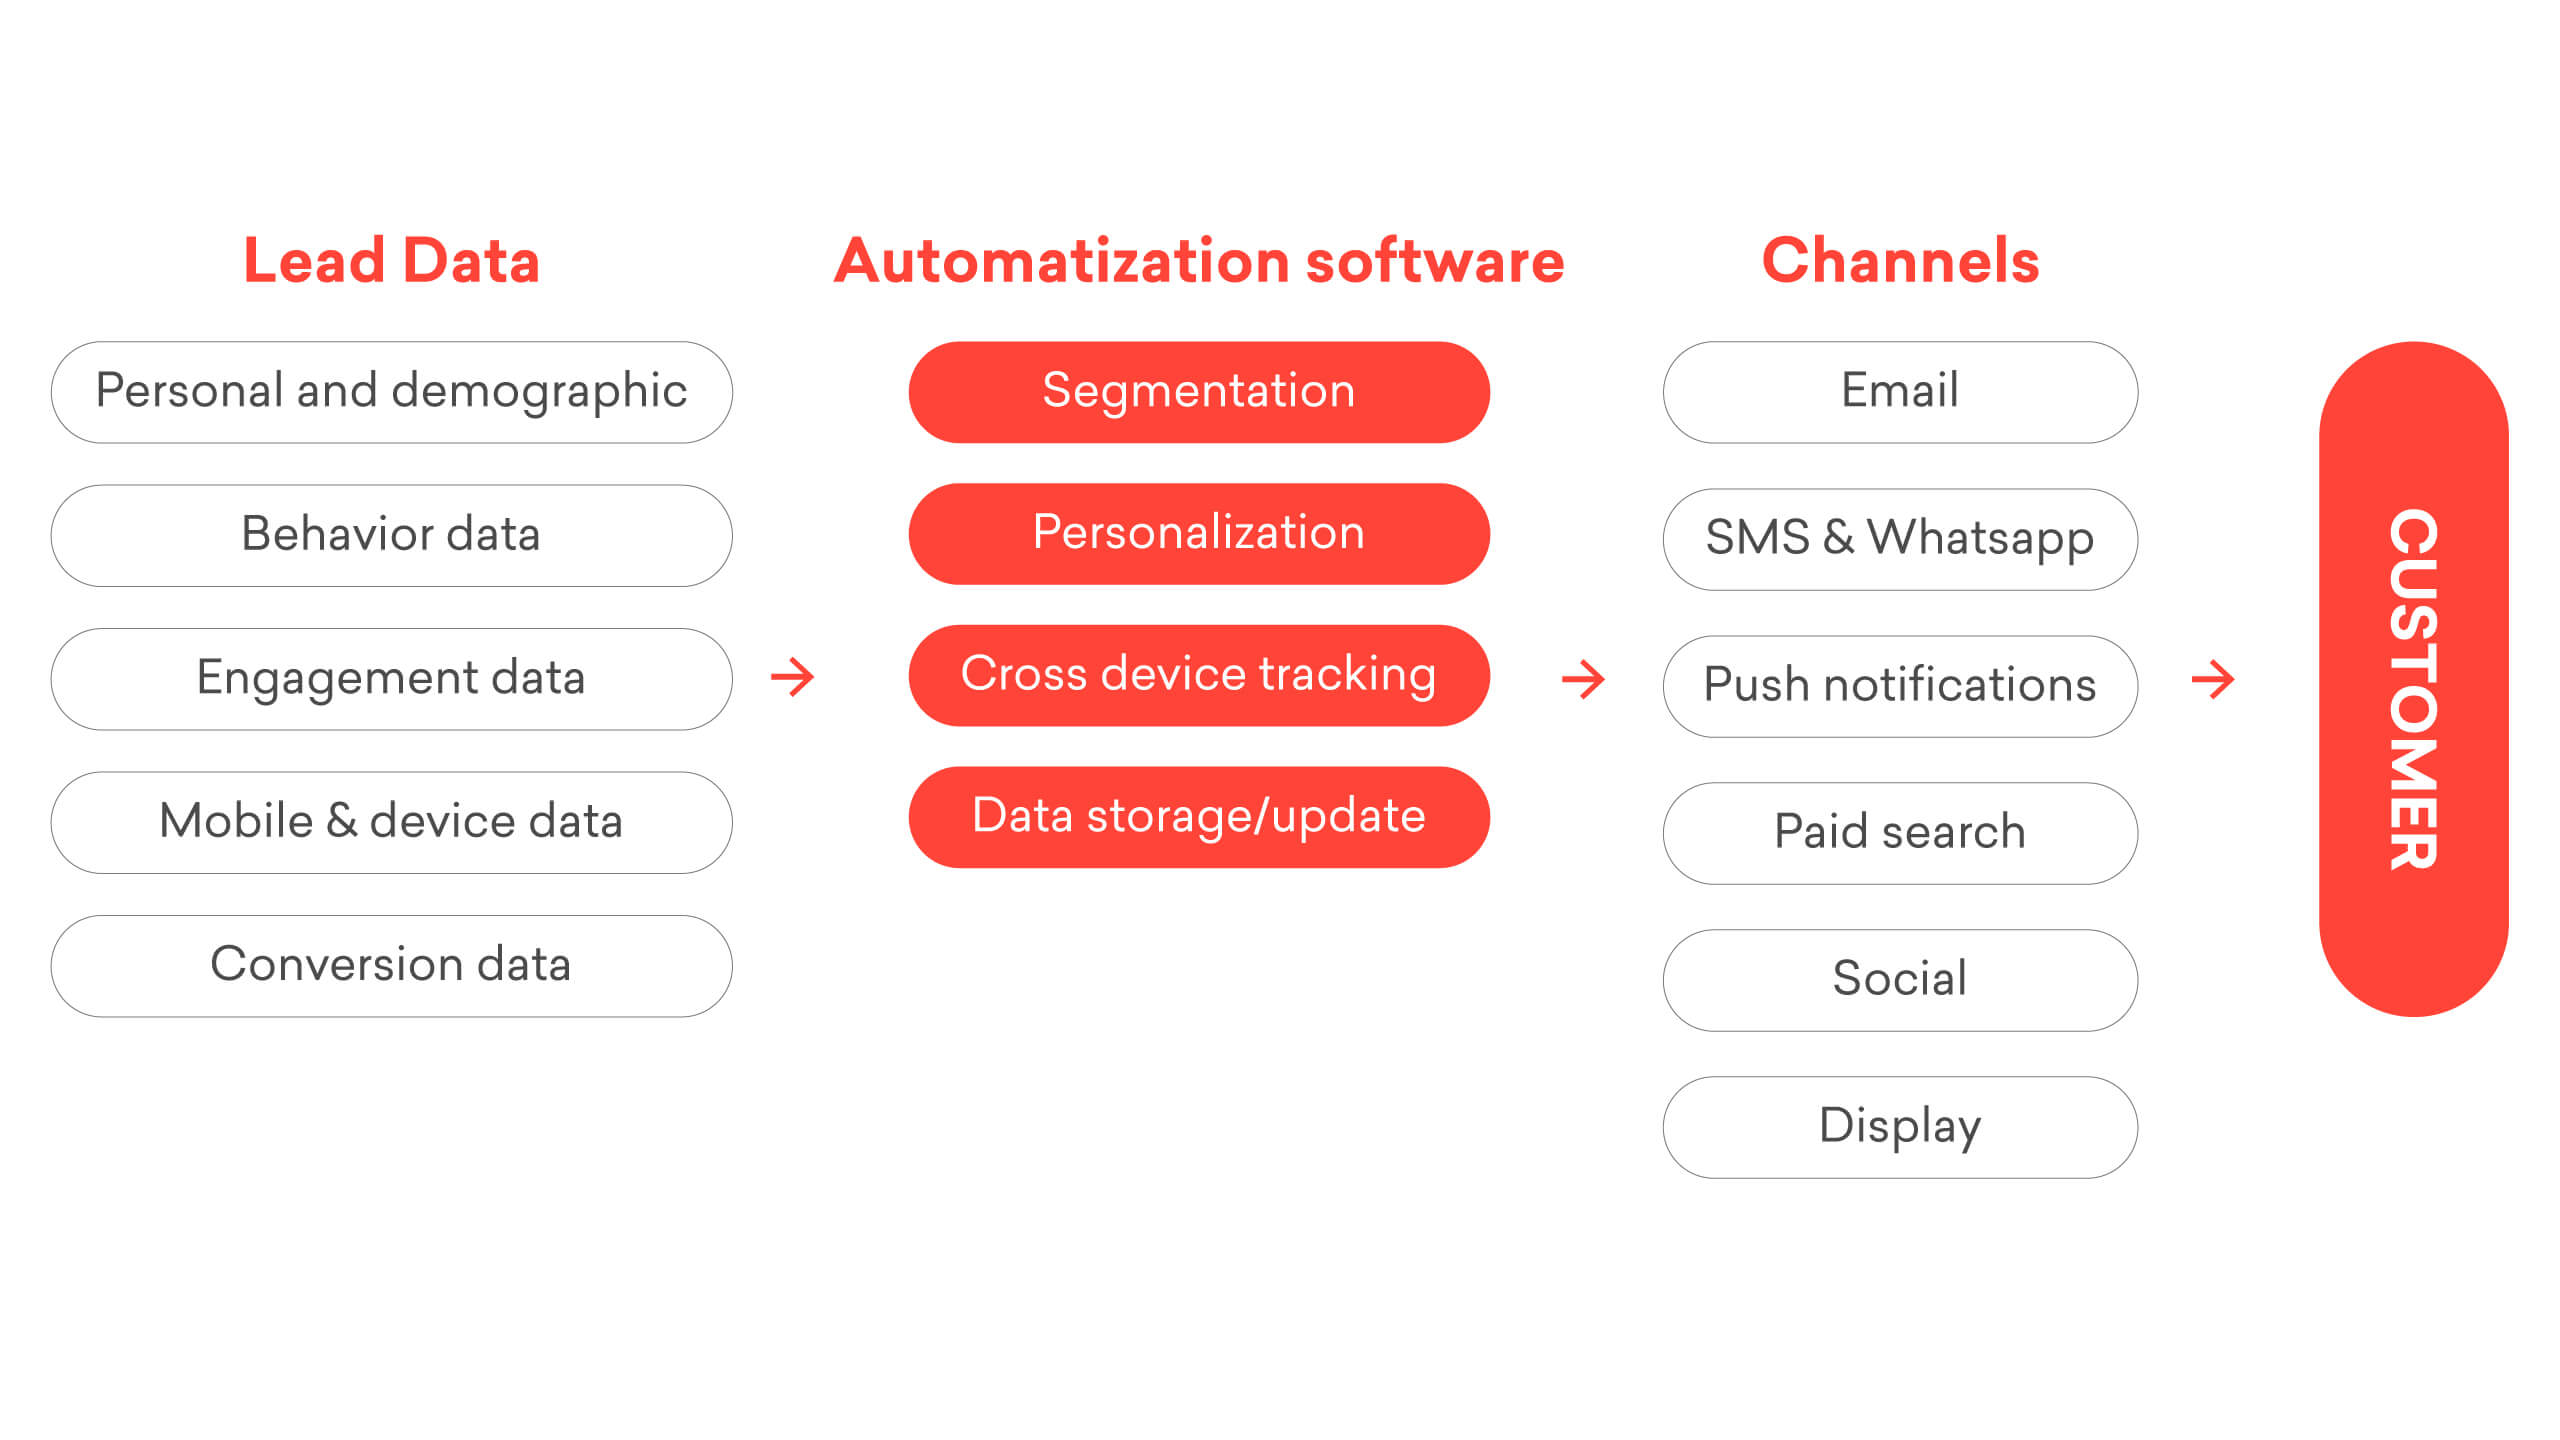 Process showing how automation helps use lead data to acquire customers